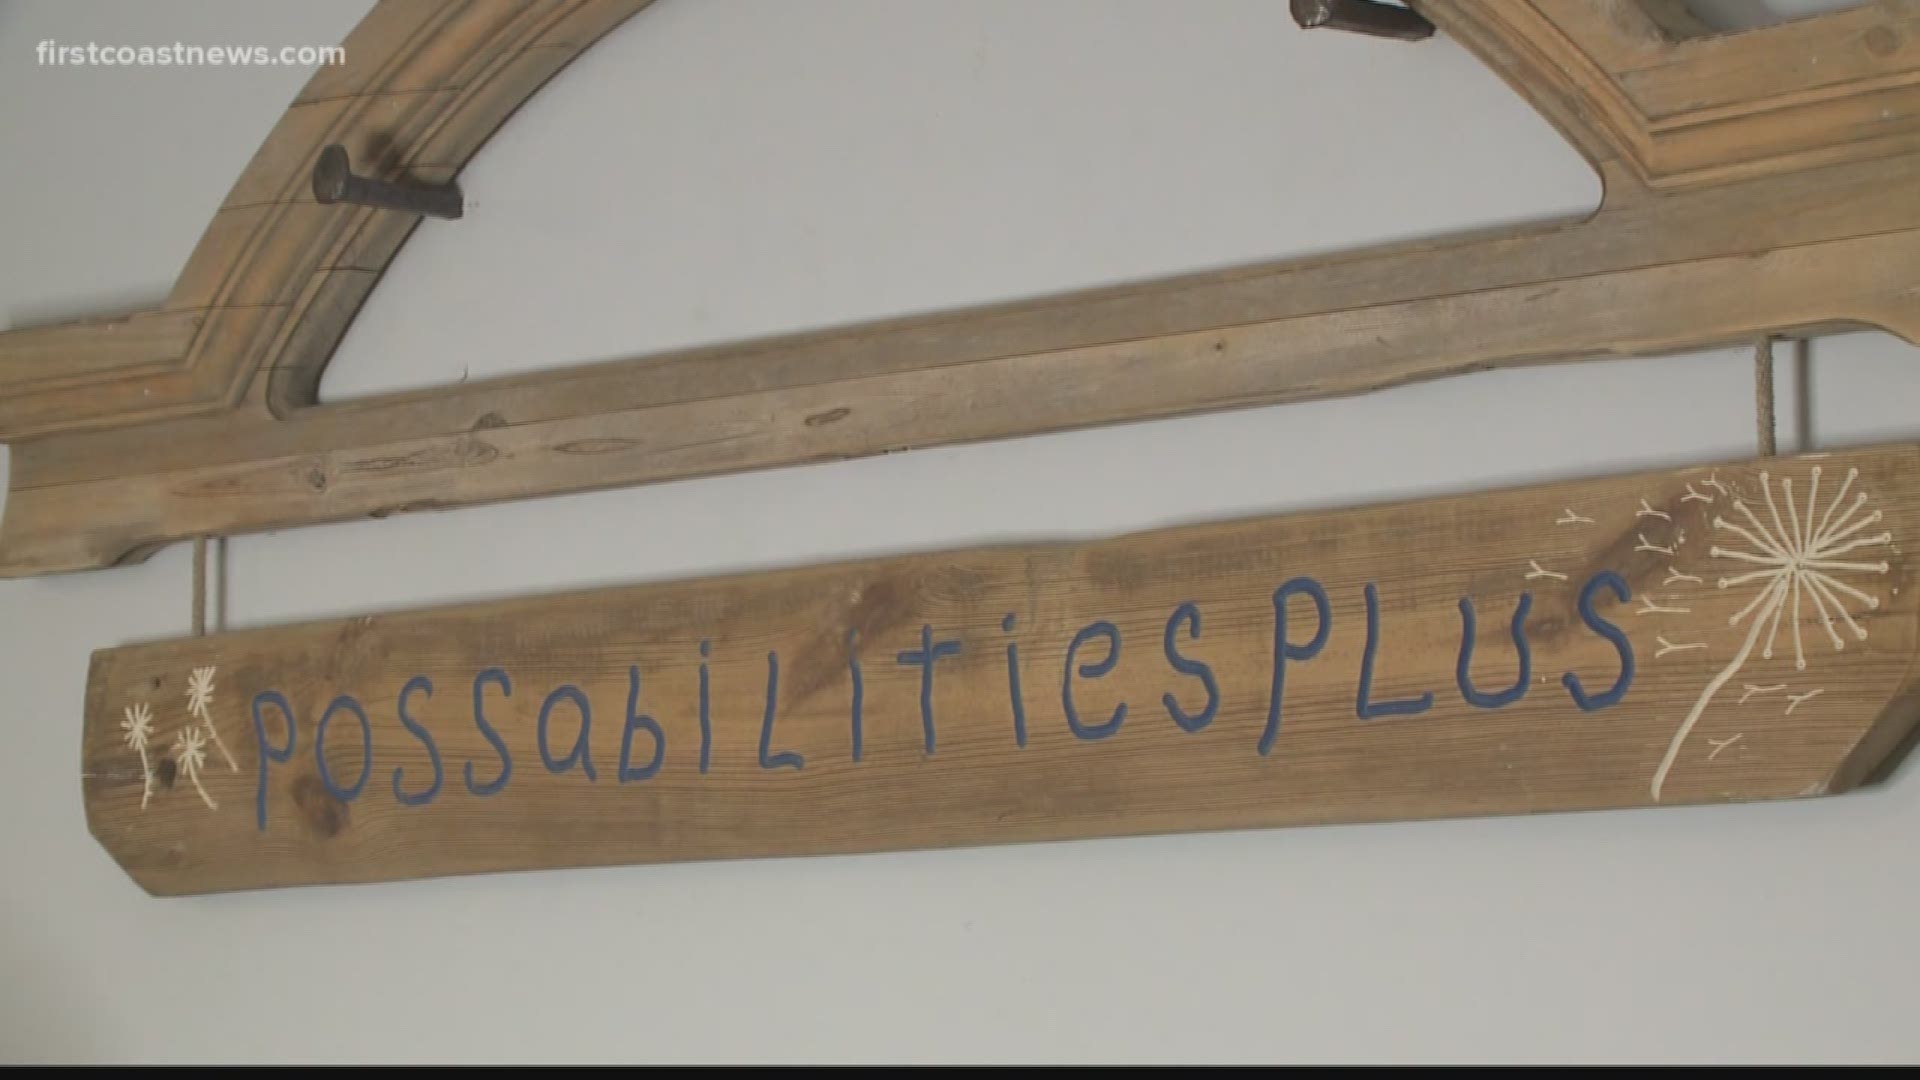 PossAbilities Plus founder Susan Peters left her teaching job and hopes to impact local youth with special needs through resume skills and socialization.